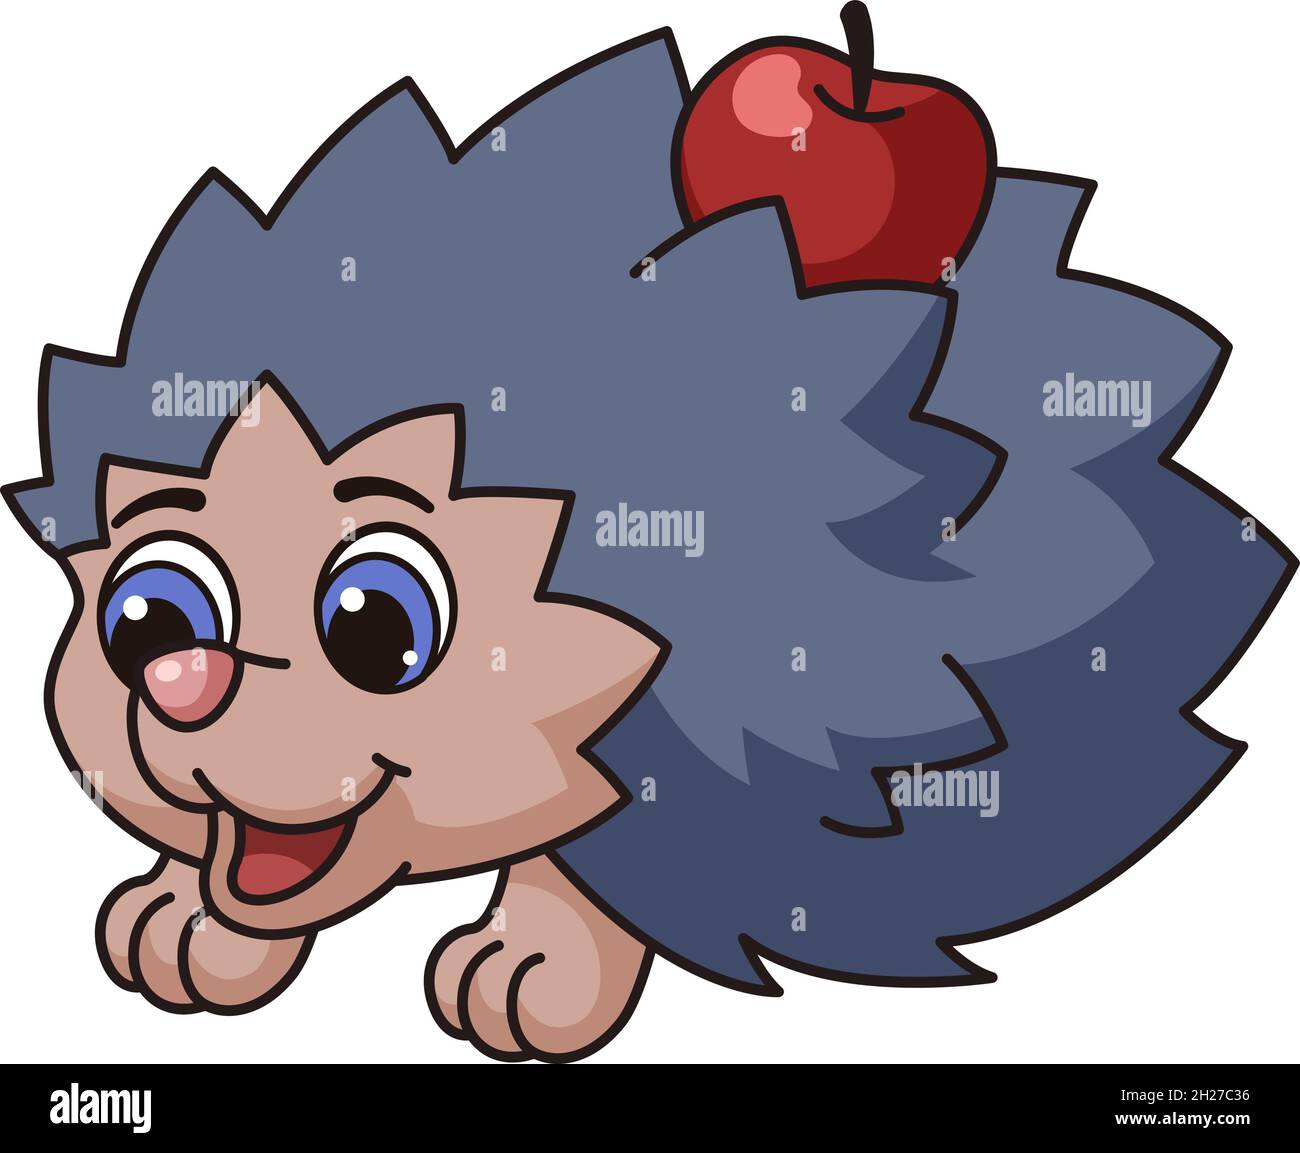 Cute hedgehog. Cartoon forest baby hedeghog animal wild nature character Stock Vector